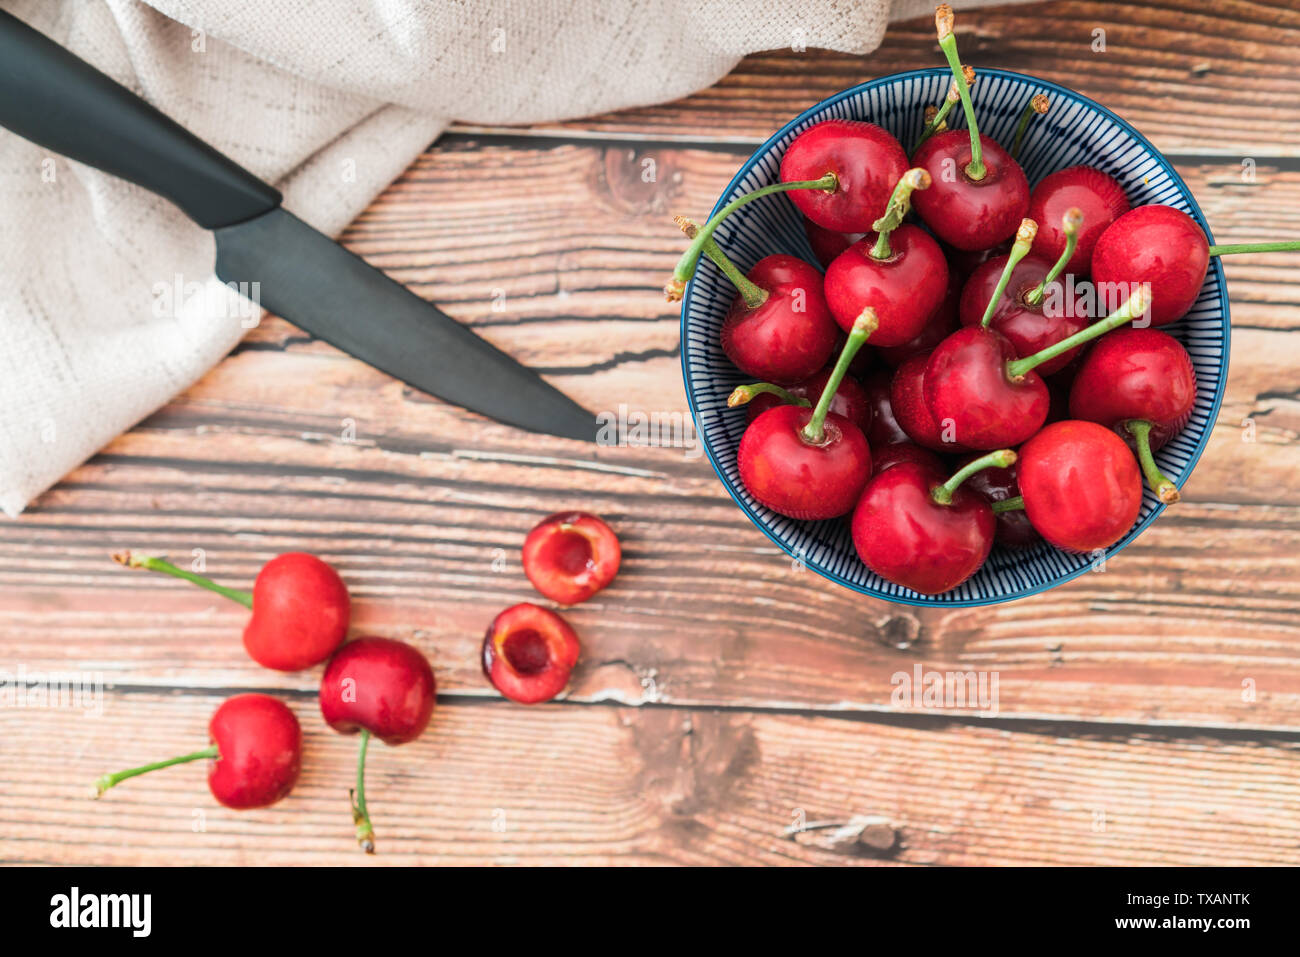 A bowl of delicious cherries. Stock Photo